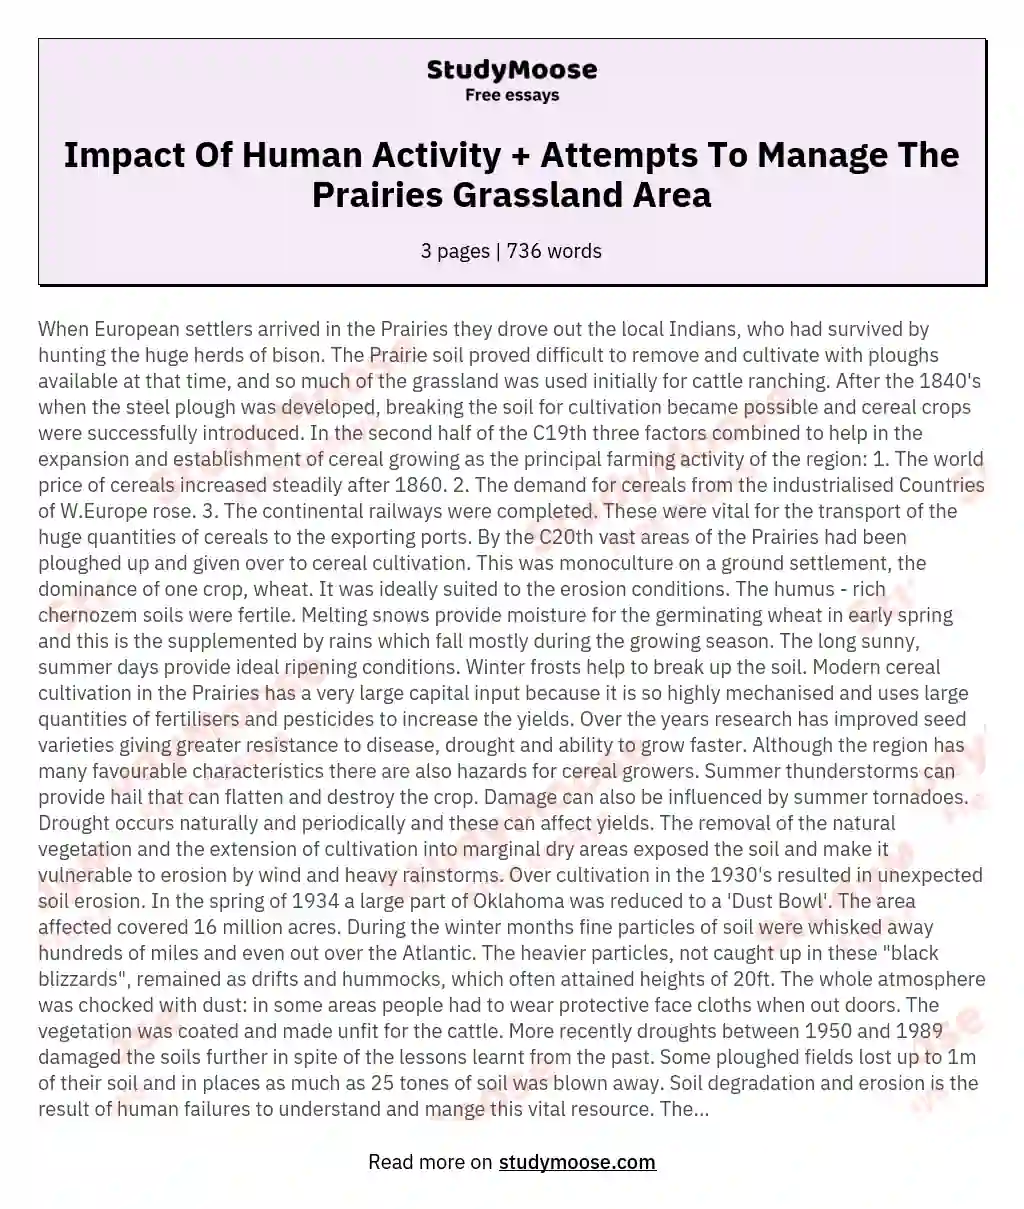 Impact Of Human Activity + Attempts To Manage The Prairies Grassland Area